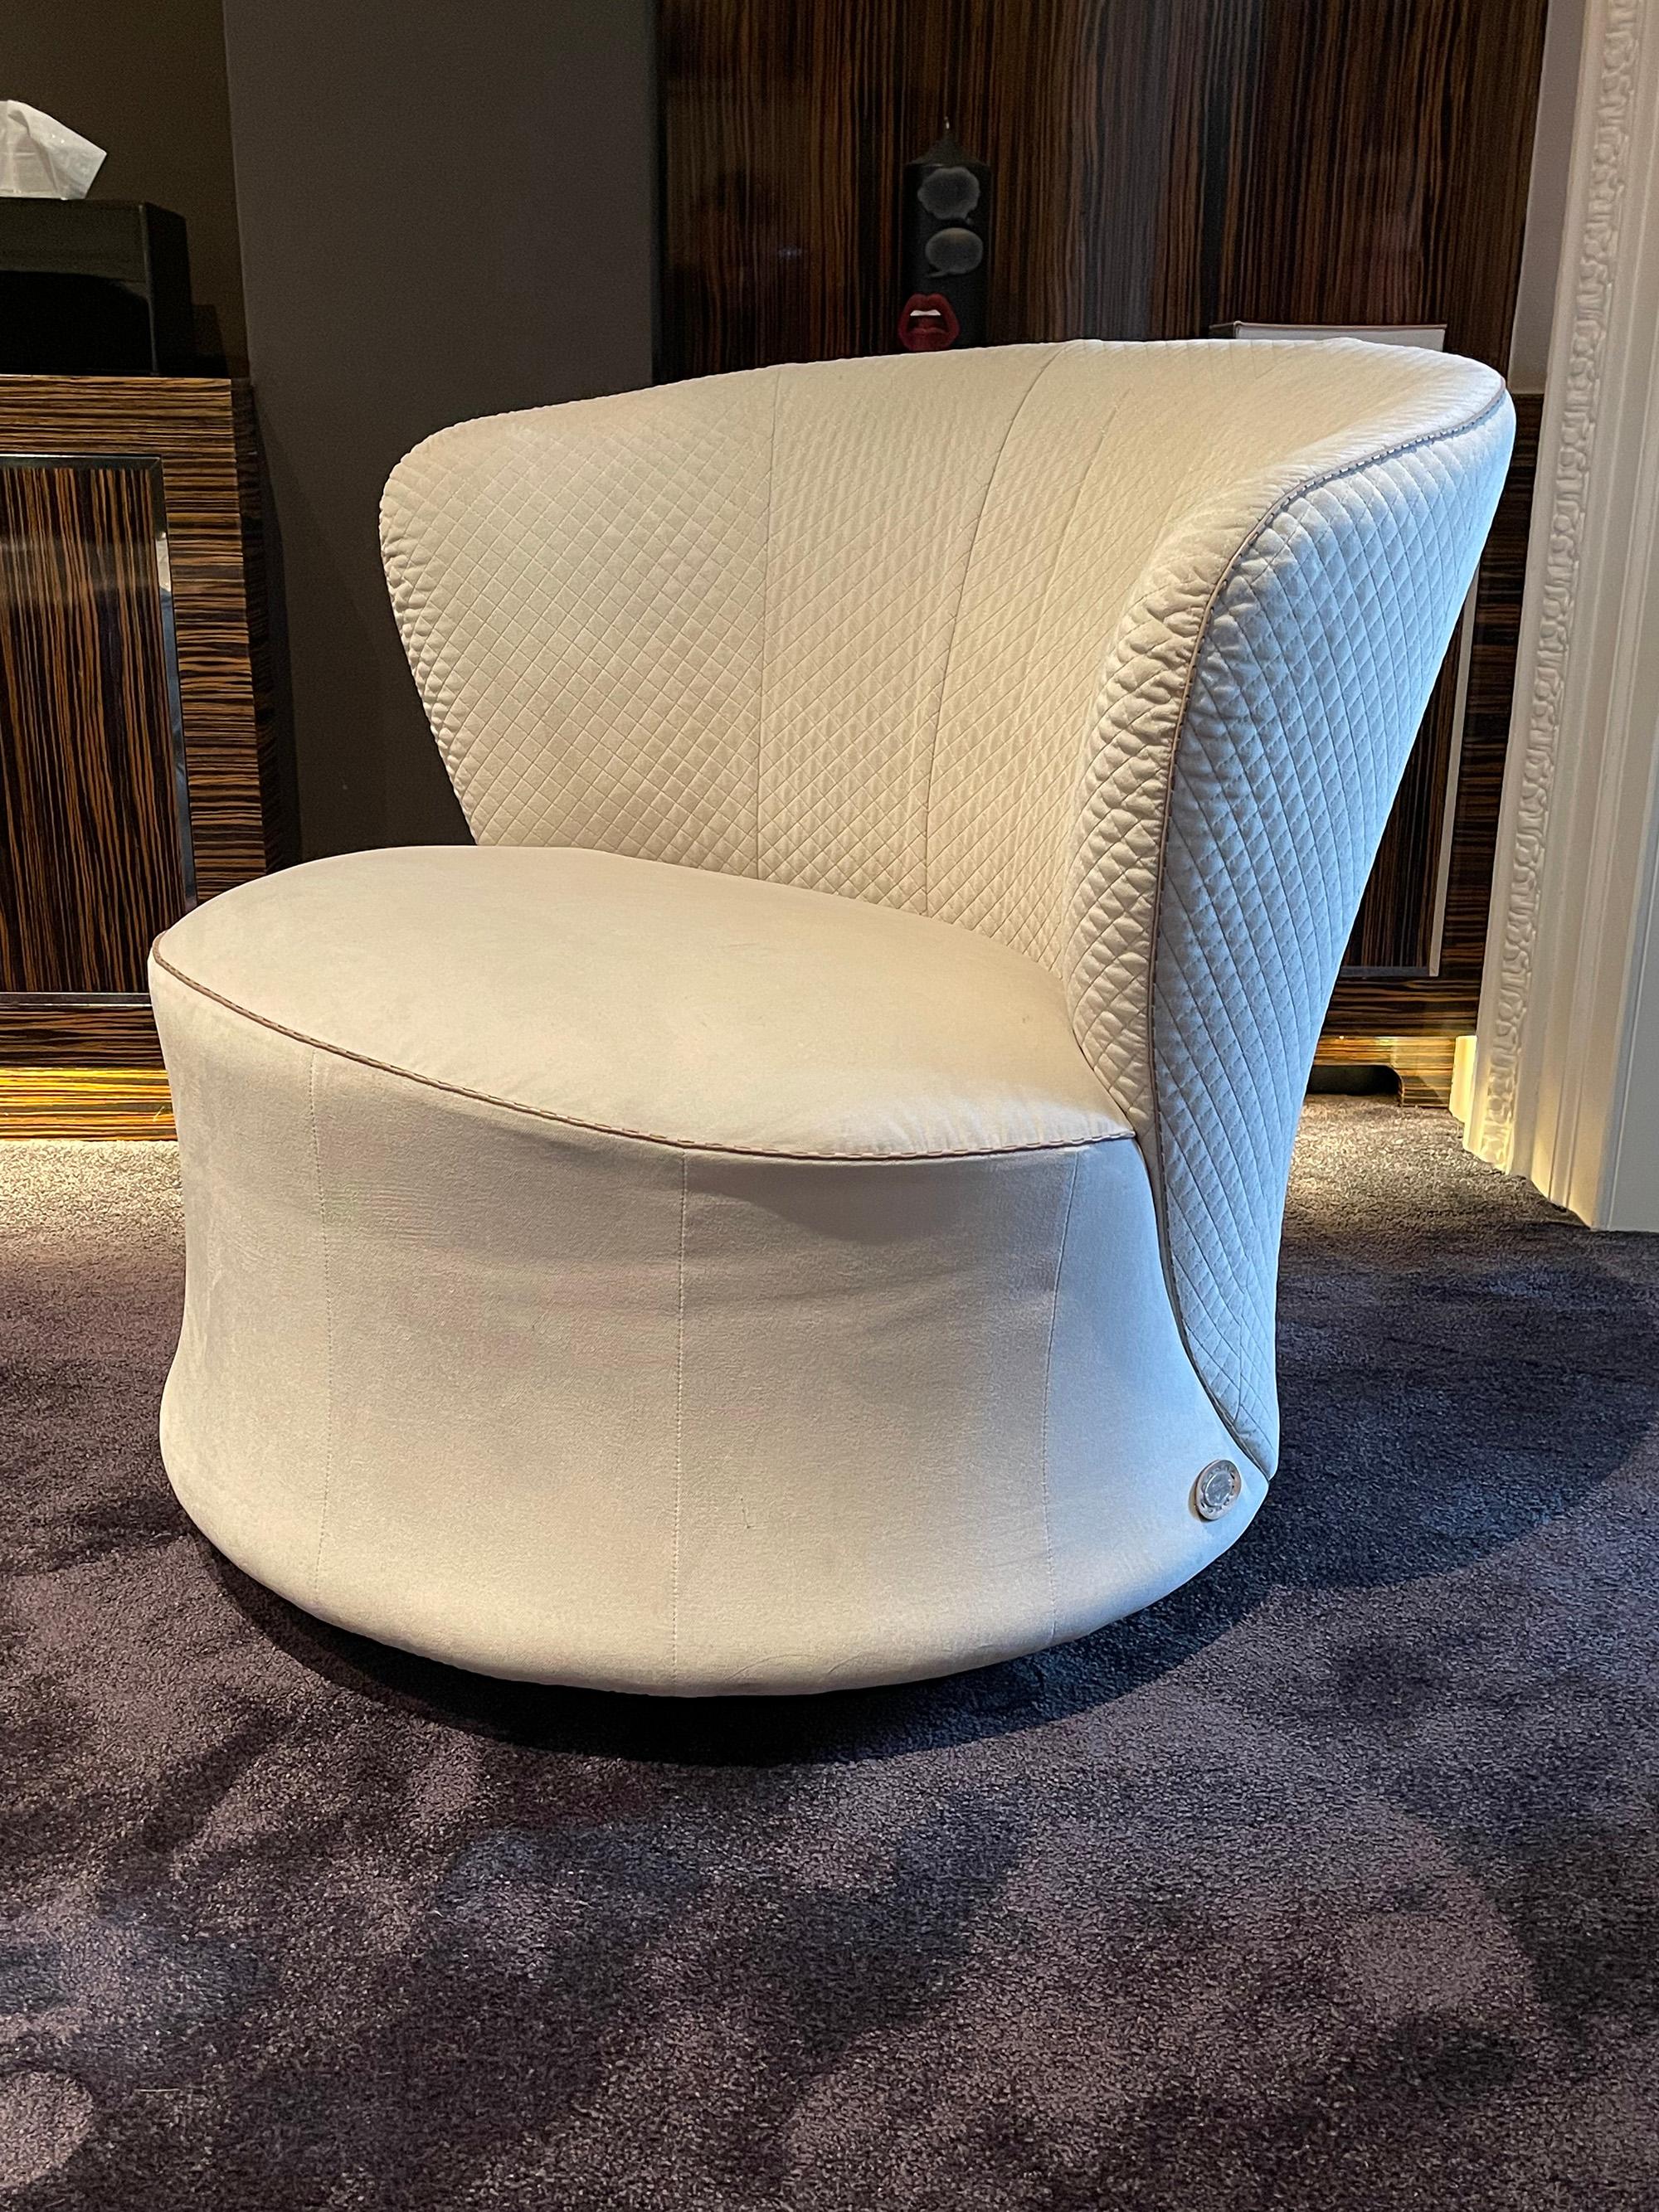 Tait Armchair by Fendi Casa.

Looking for a luxurious and comfortable chair that will make a statement in your home? Look no further than the Tait Armchair by Fendi Casa. 

Upholstered in a smooth and sumptuous velvet, this statement piece sits atop